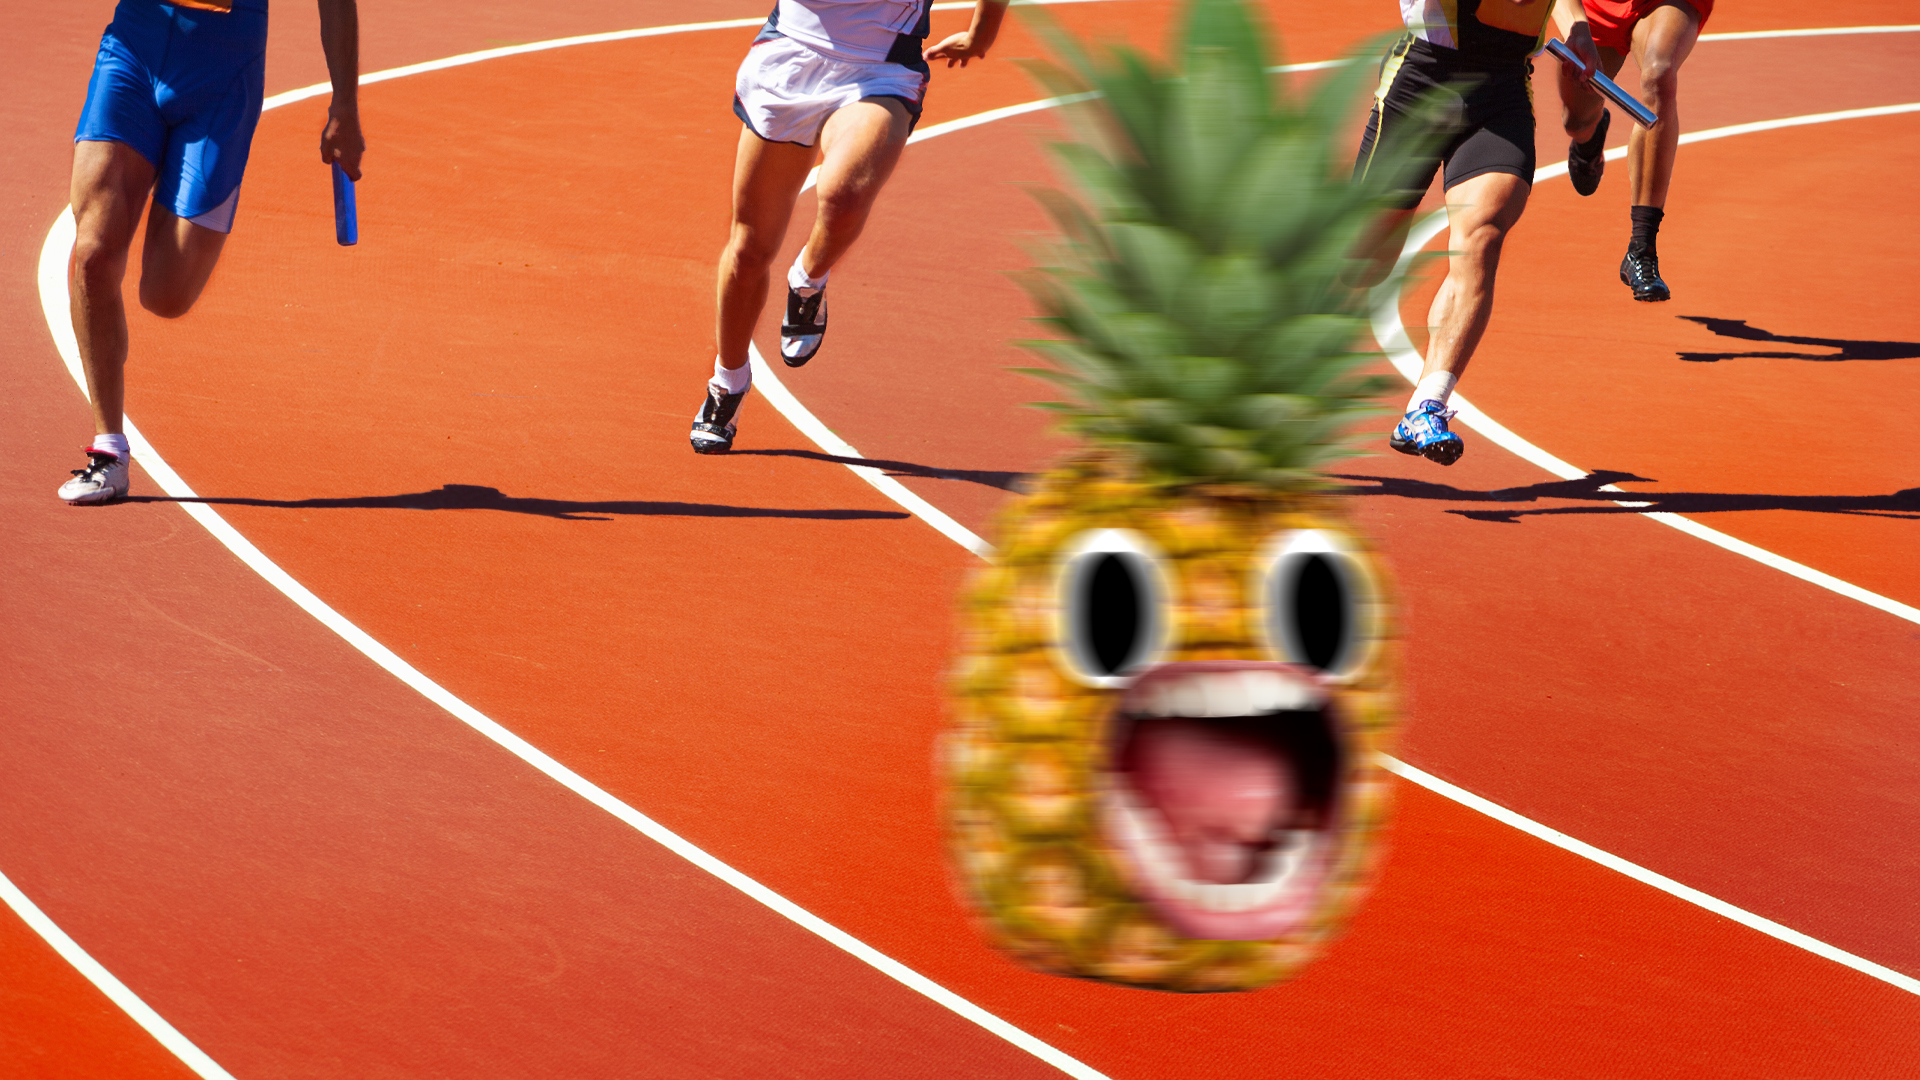 A pineapple being chased by several athletes